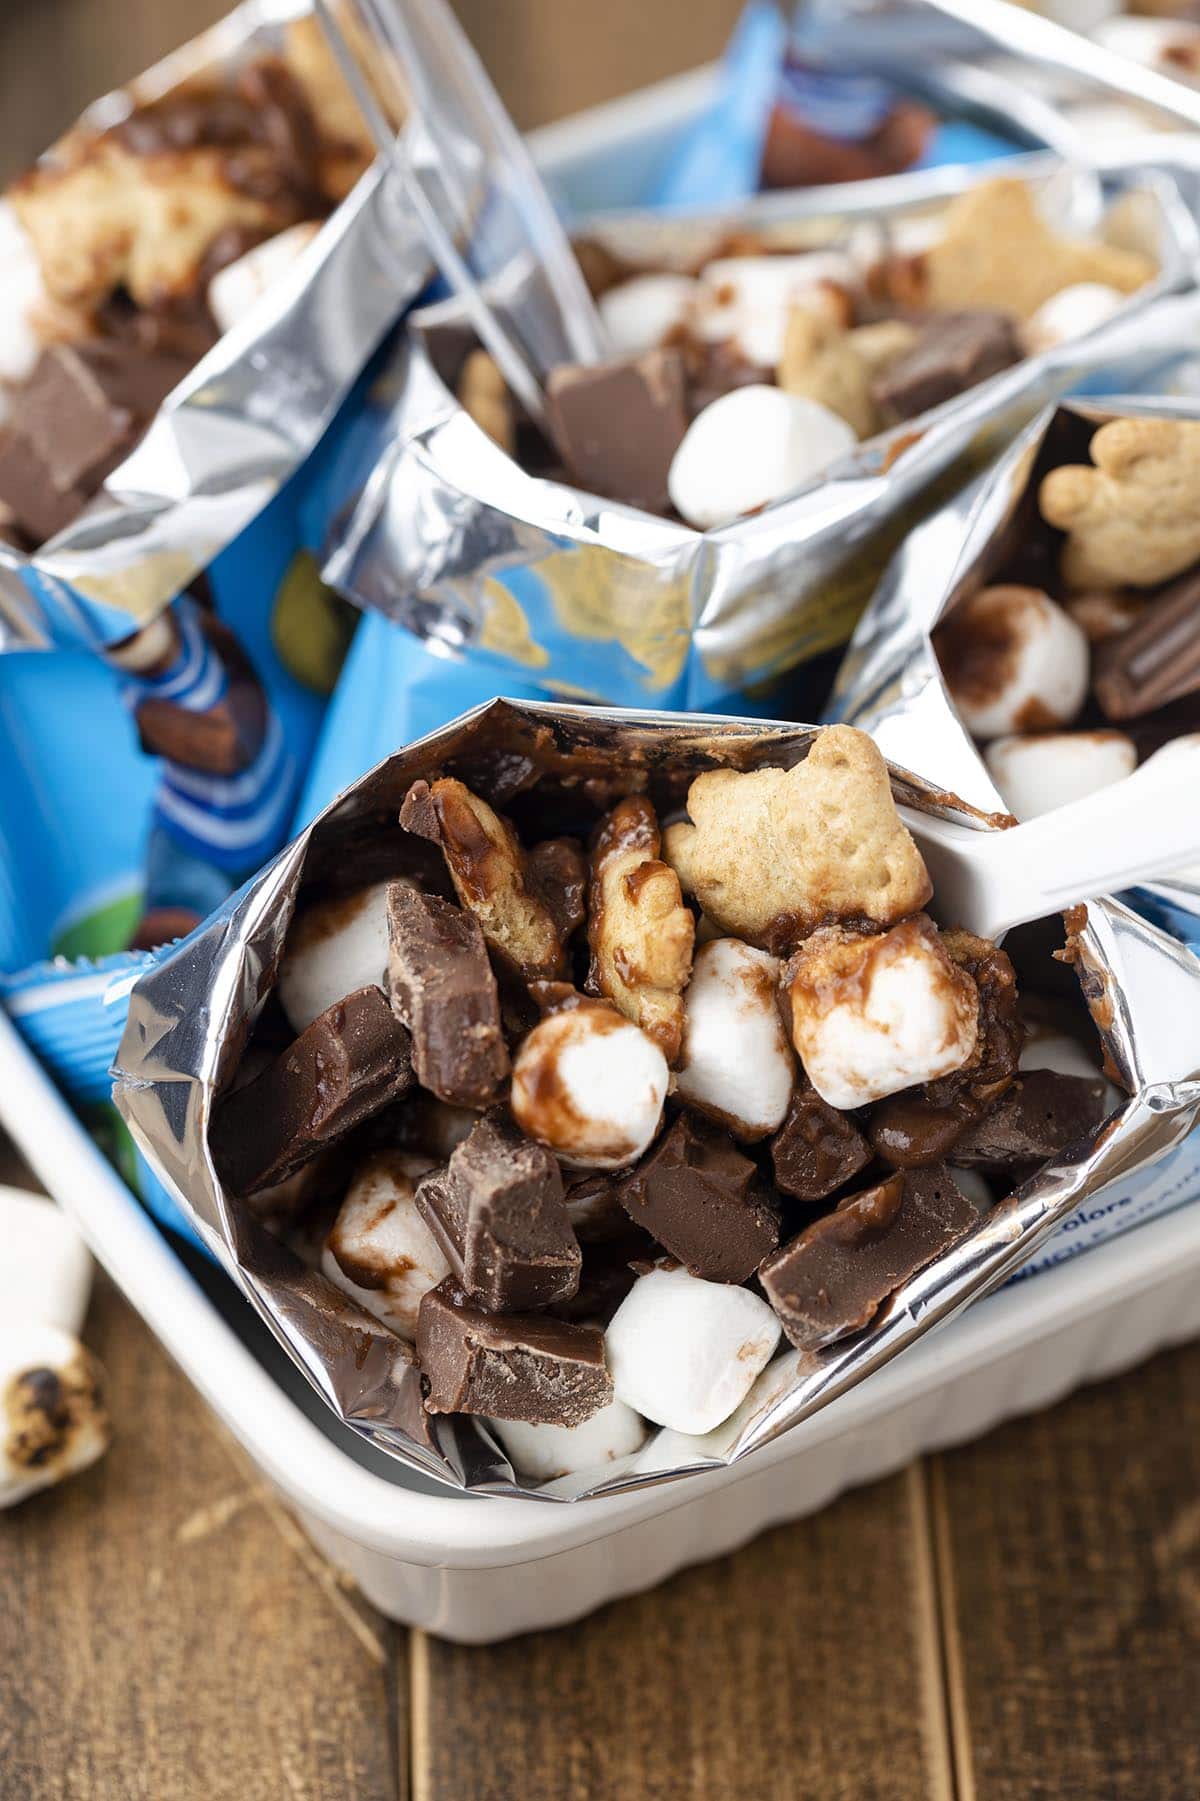 Walking S'mores with chocolate chunks